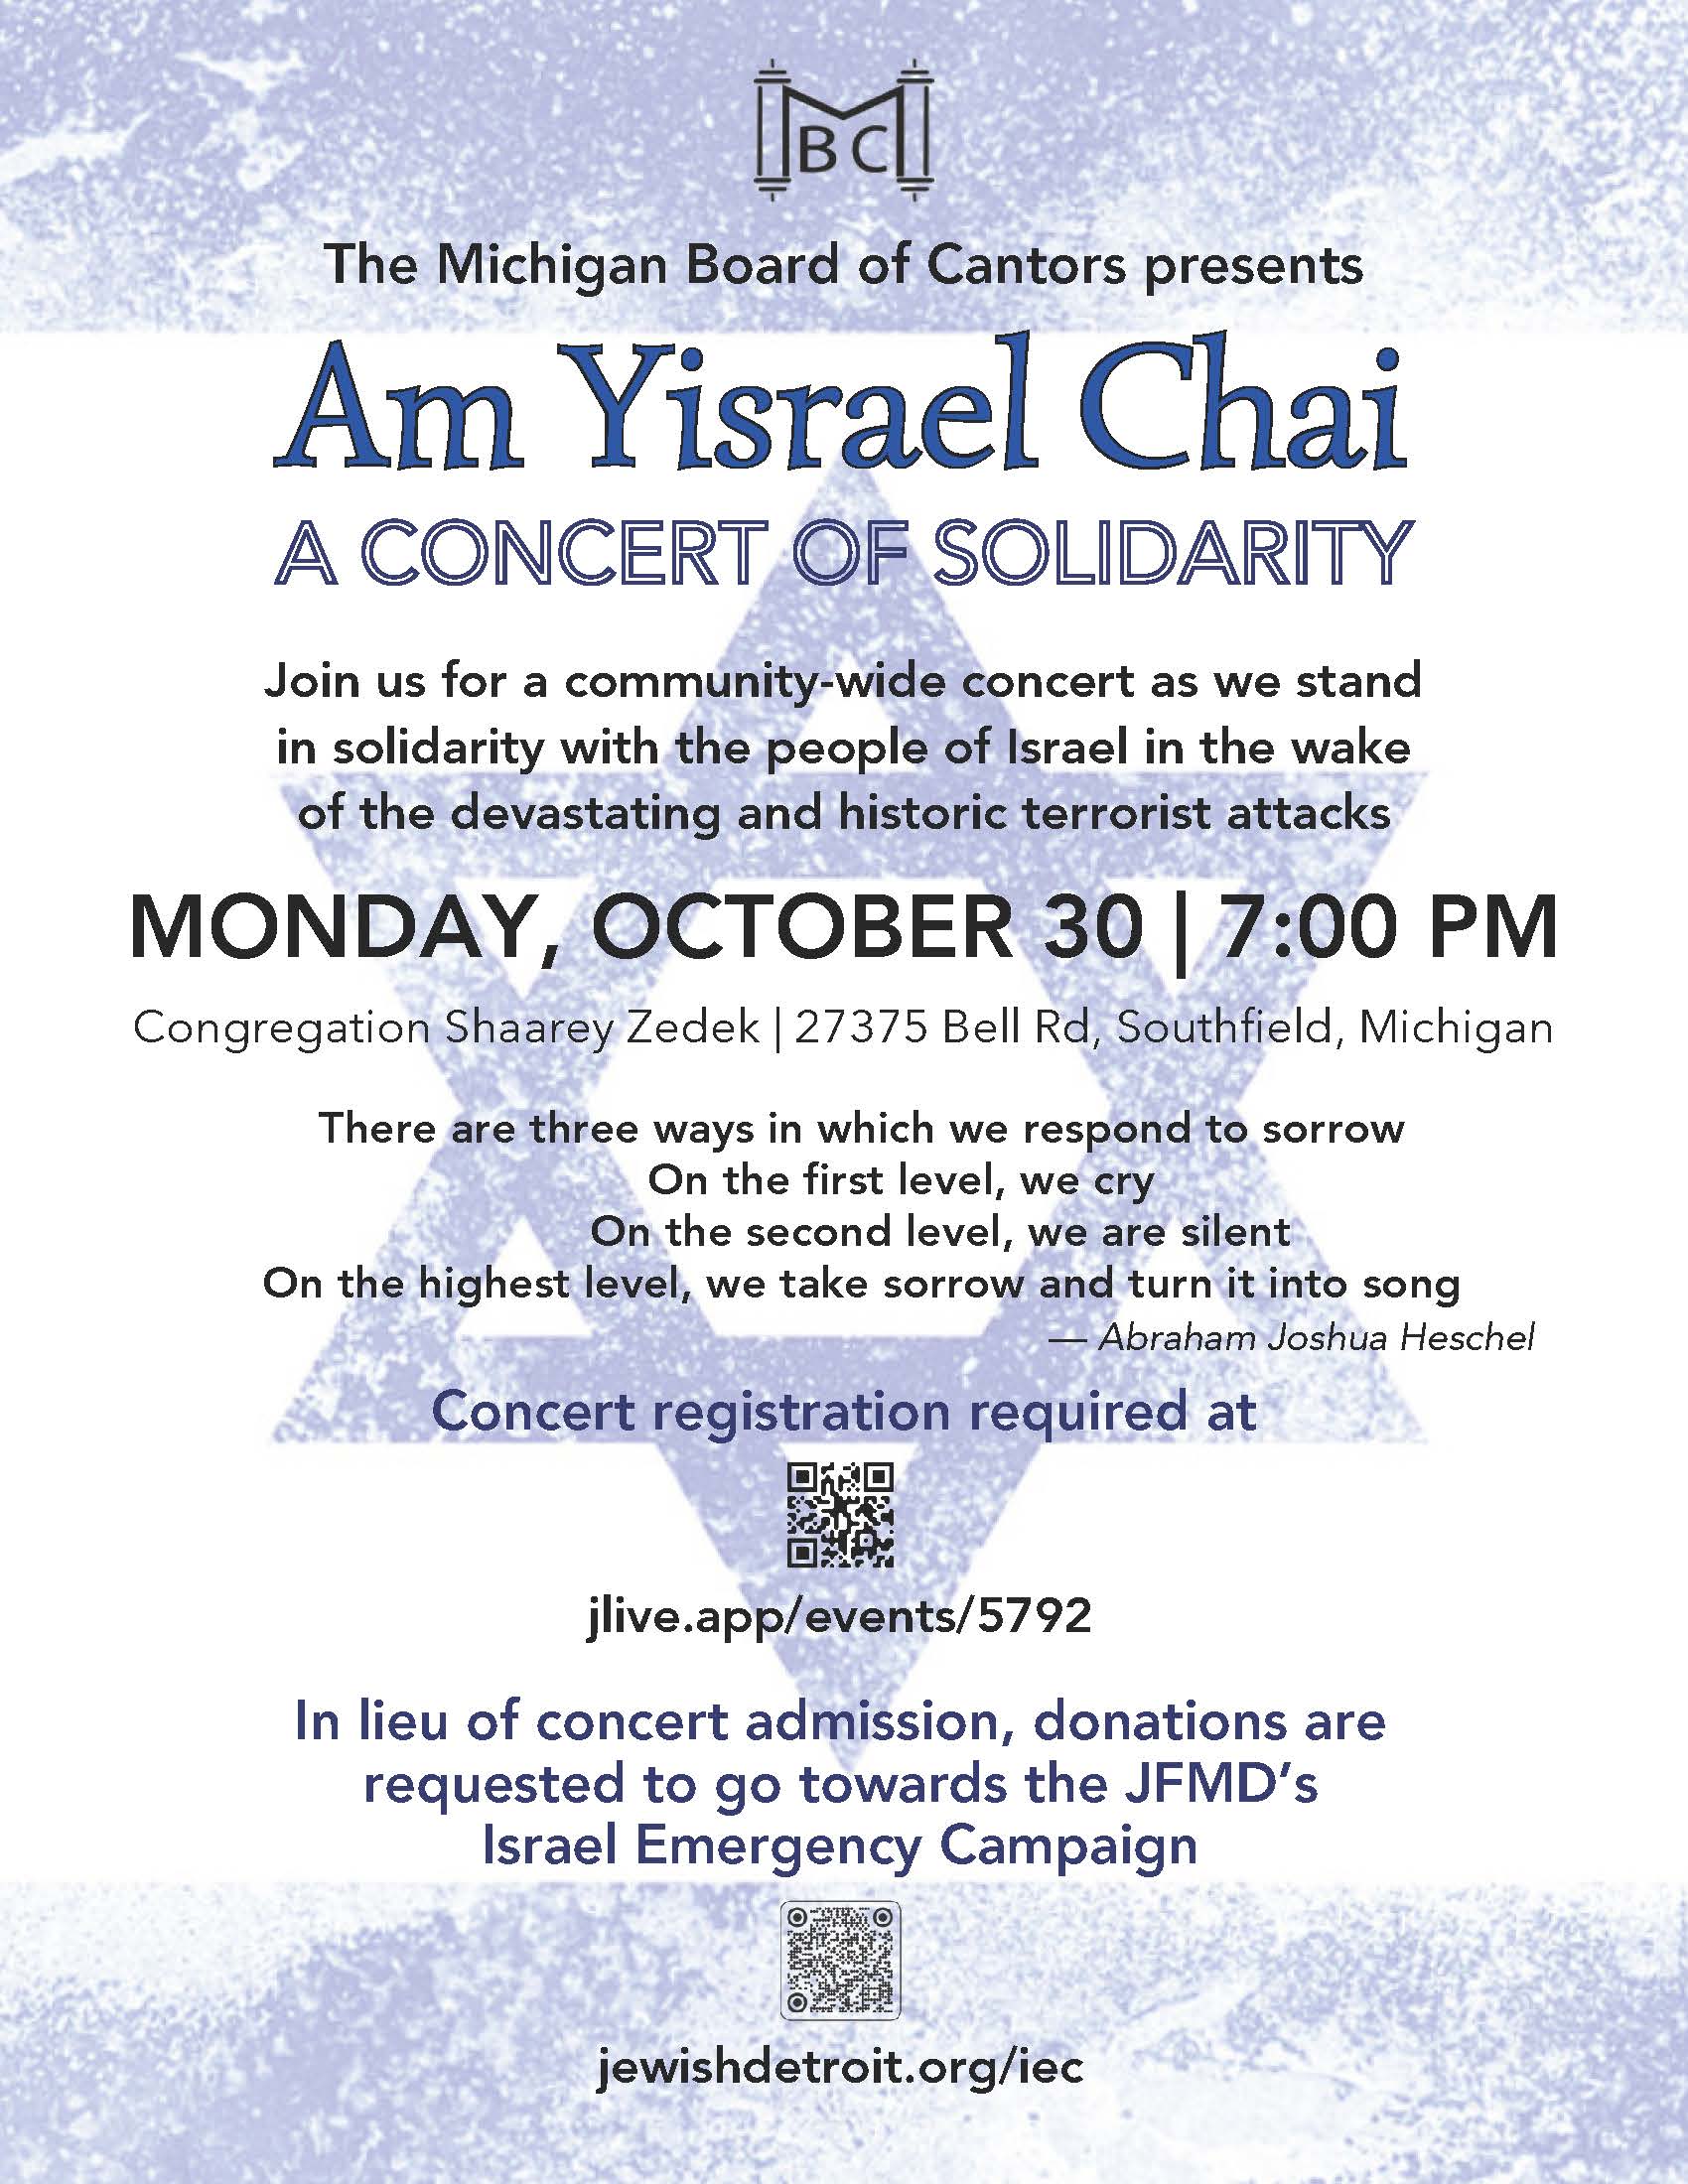 Am Yisrael Chai:  A Concert of Solidarity